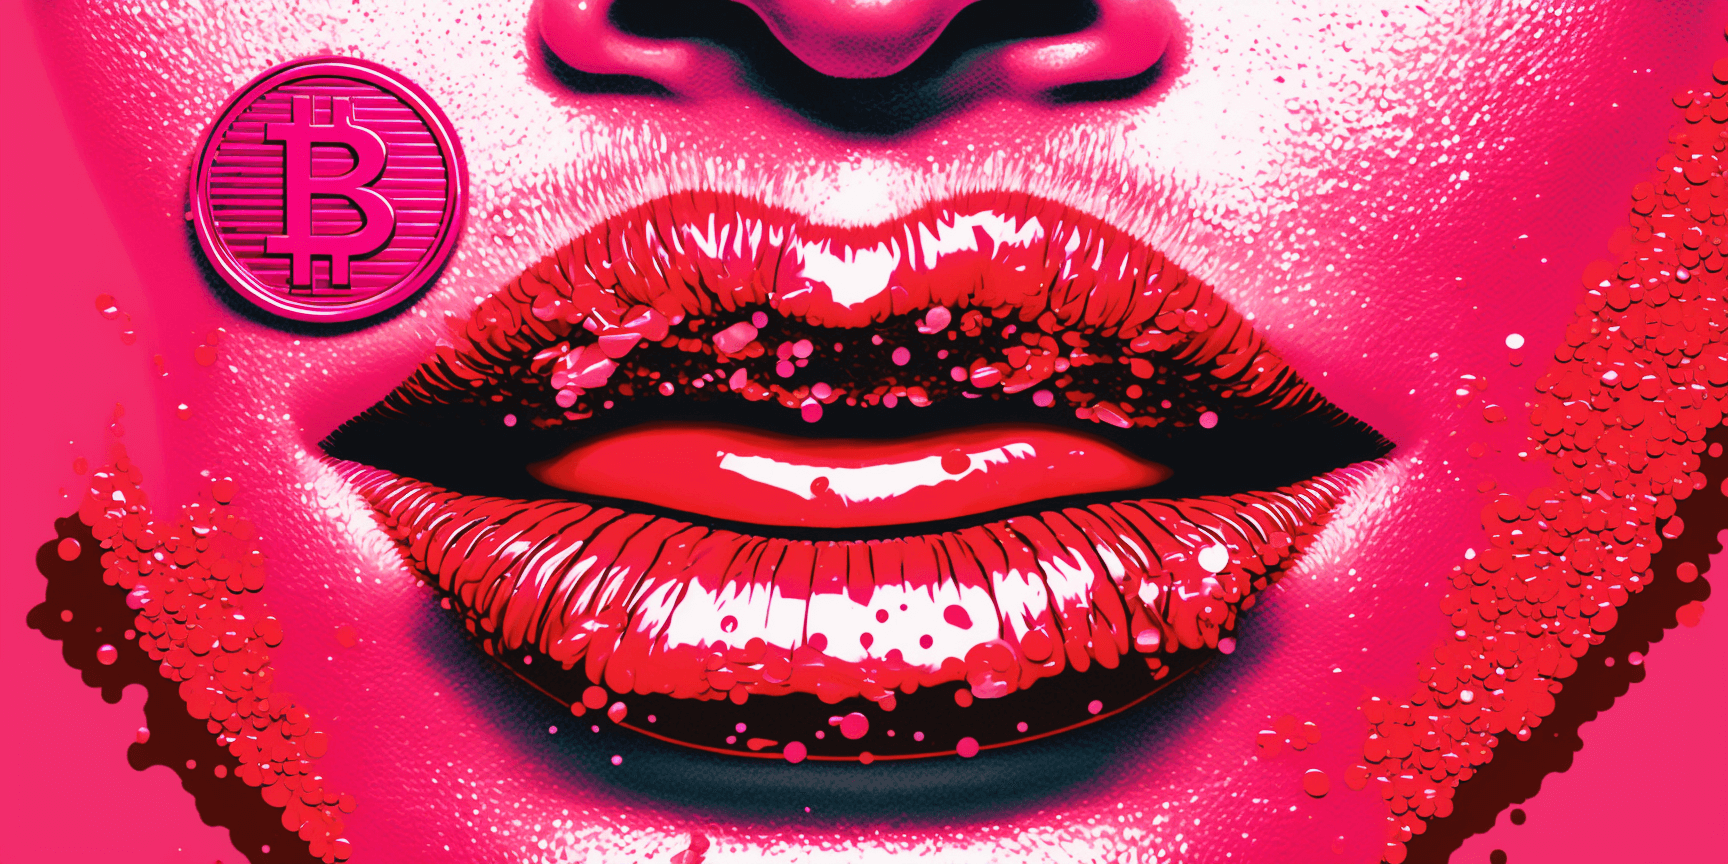 Pink Bitcoin with lipstick, art generated by Midjourney